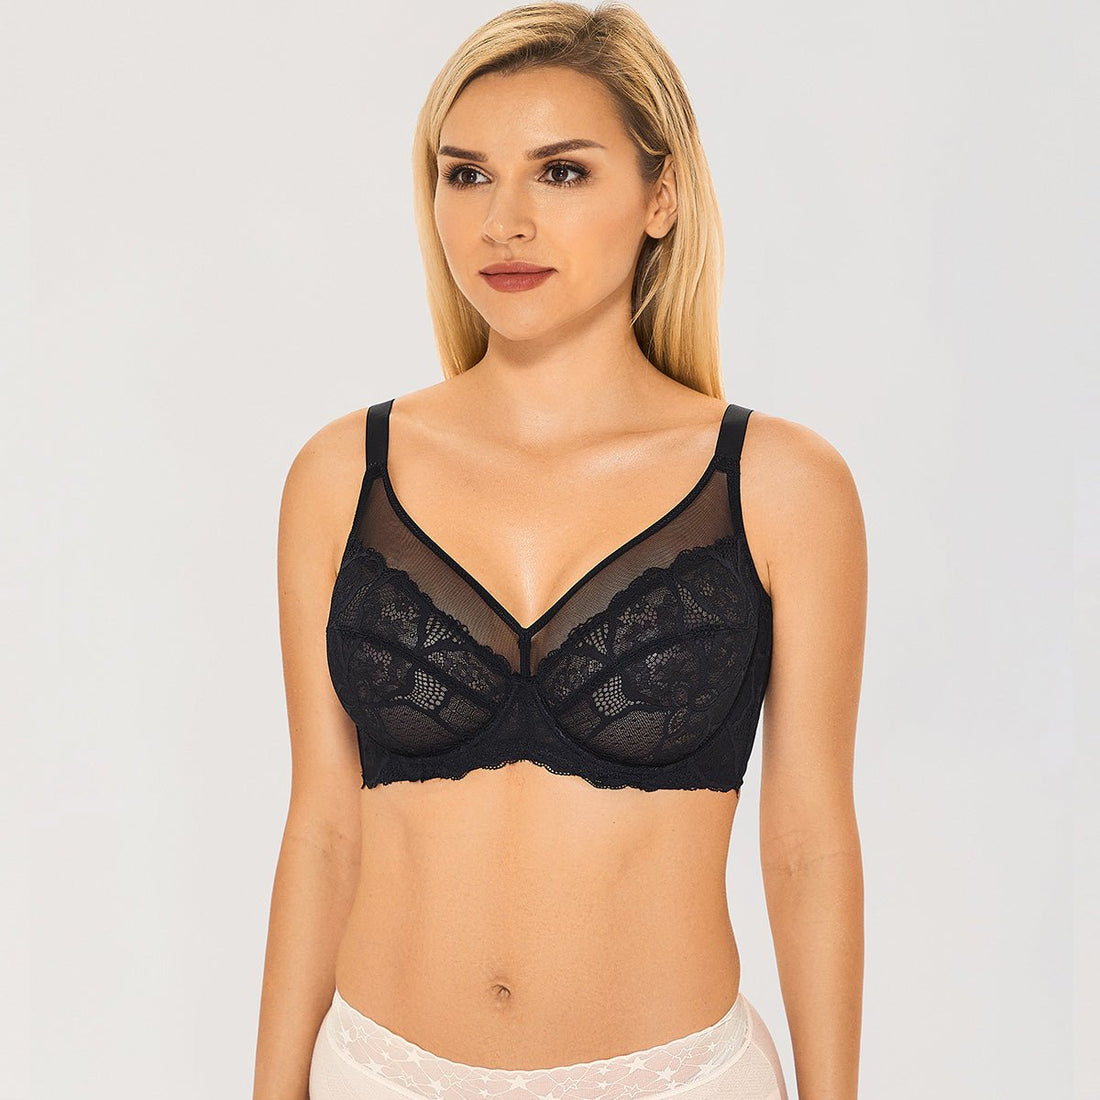 See-through Lace Sheer Unlined Minimizer Underwire Back Closure Black Bra - 0cm